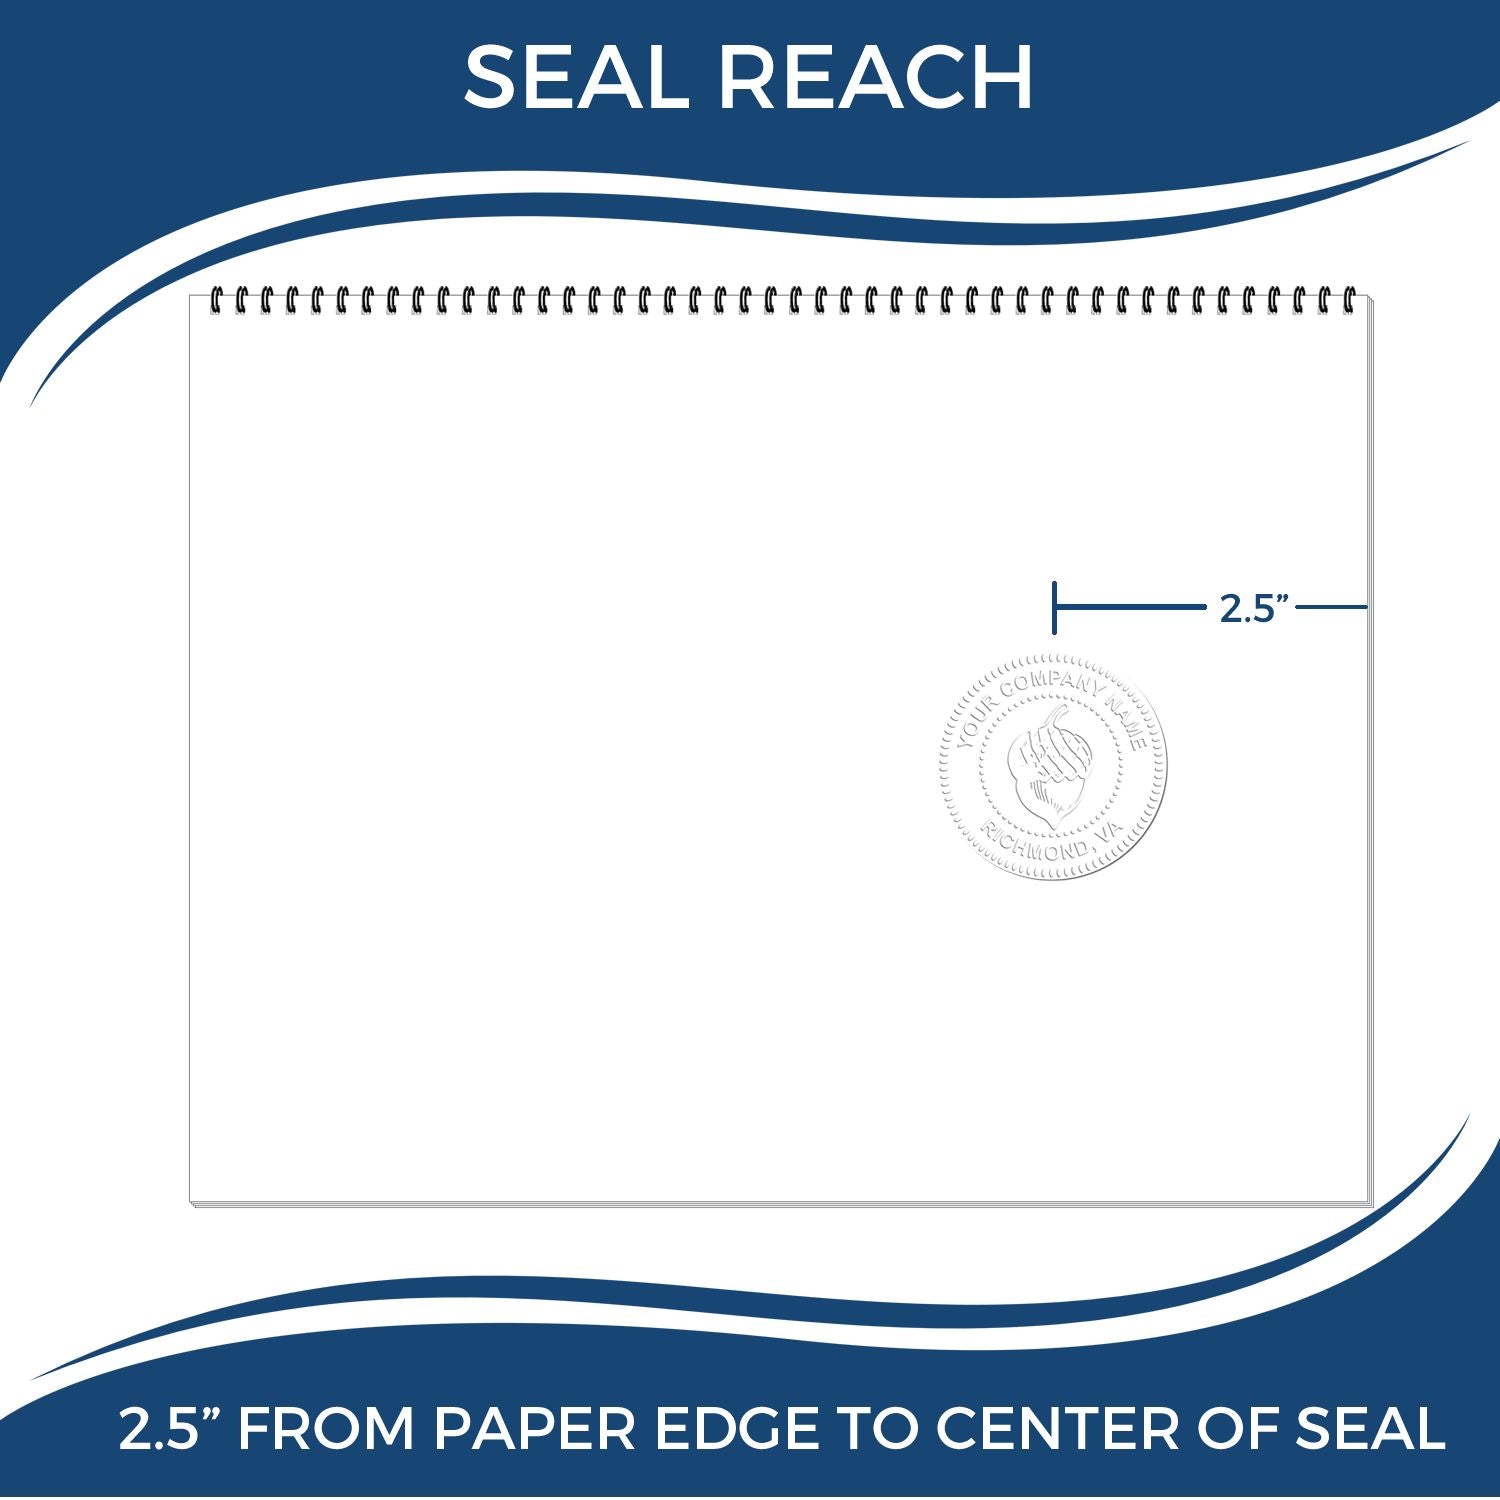 An infographic showing the seal reach which is represented by a ruler and a miniature seal image of the Long Reach Arizona Land Surveyor Seal